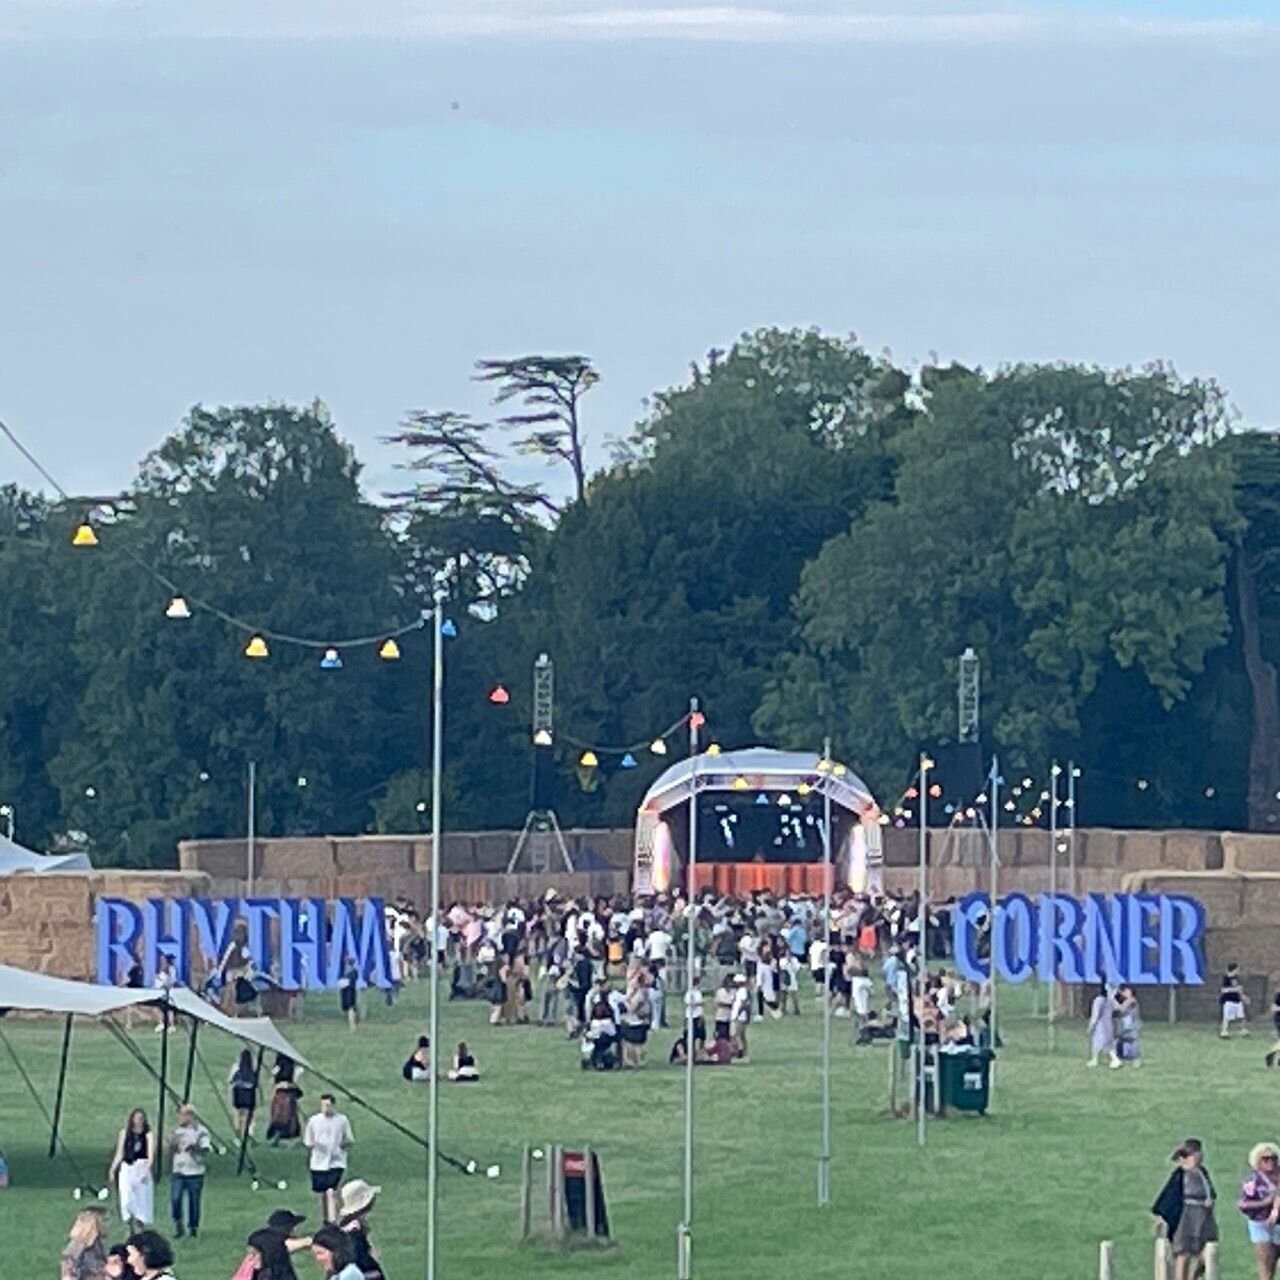 Rhythm Corner @ We Out Here 2023
@weouthere

Huge lettering designed for wayfinding signage to welcome music-lovers to the bass-driven Rhythm Corner second stage at We Out Here festival.

Bevelled 3D lettering designed and painted by mural artist Bec